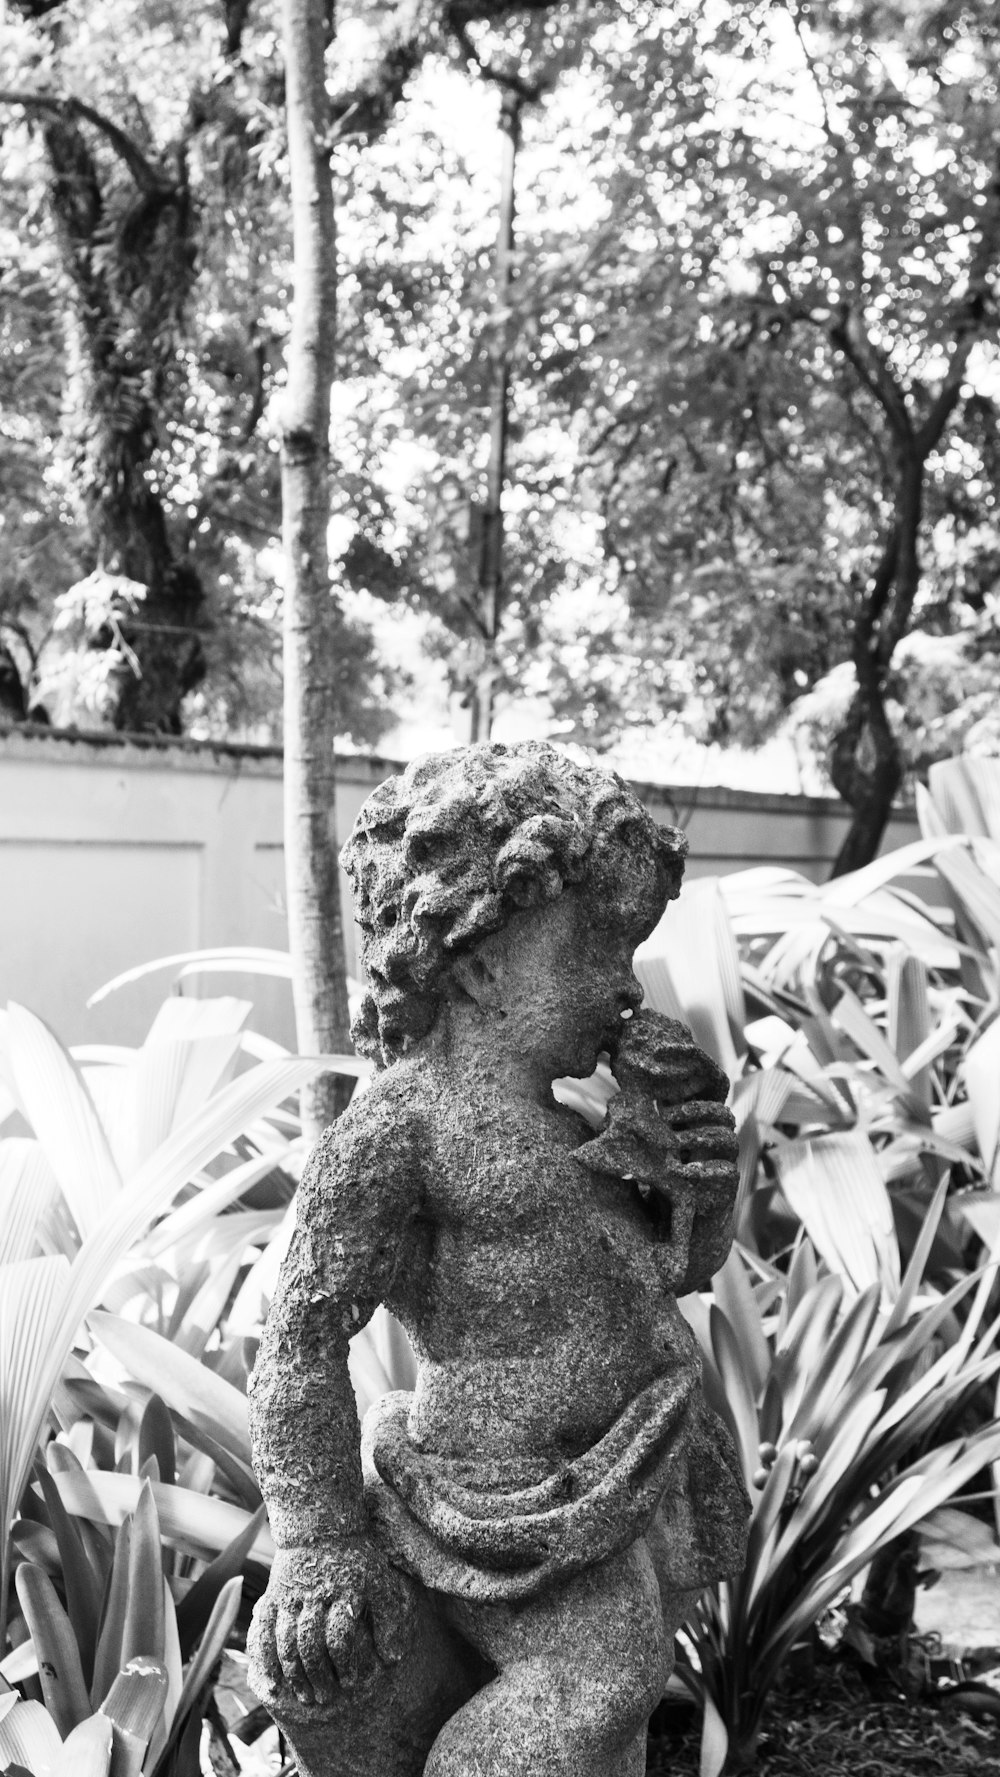 a black and white photo of a statue in a garden